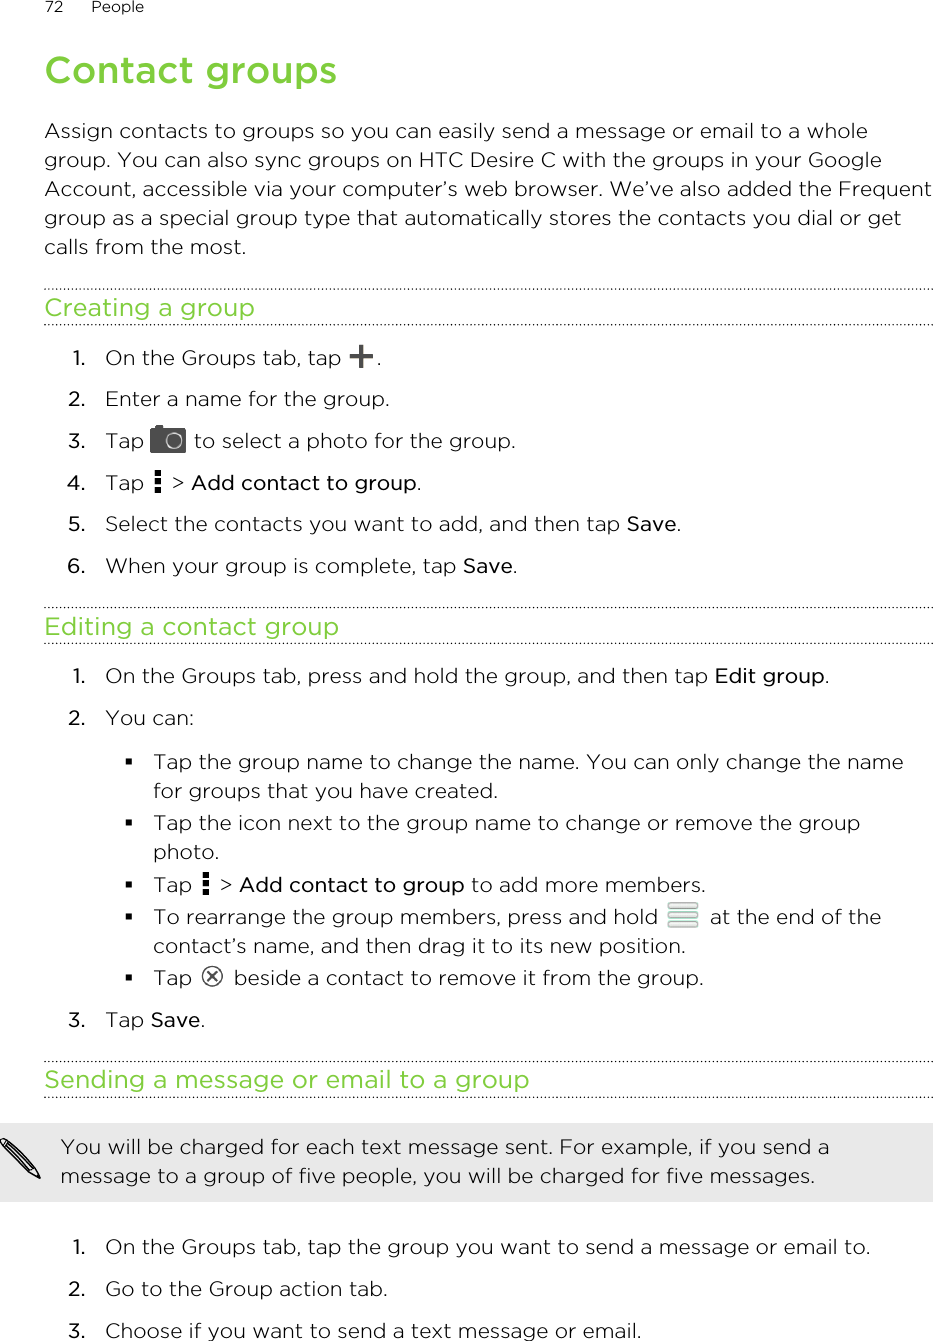 Contact groupsAssign contacts to groups so you can easily send a message or email to a wholegroup. You can also sync groups on HTC Desire C with the groups in your GoogleAccount, accessible via your computer’s web browser. We’ve also added the Frequentgroup as a special group type that automatically stores the contacts you dial or getcalls from the most.Creating a group1. On the Groups tab, tap  .2. Enter a name for the group.3. Tap   to select a photo for the group.4. Tap   &gt; Add contact to group.5. Select the contacts you want to add, and then tap Save.6. When your group is complete, tap Save.Editing a contact group1. On the Groups tab, press and hold the group, and then tap Edit group.2. You can:§Tap the group name to change the name. You can only change the namefor groups that you have created.§Tap the icon next to the group name to change or remove the groupphoto.§Tap   &gt; Add contact to group to add more members.§To rearrange the group members, press and hold   at the end of thecontact’s name, and then drag it to its new position.§Tap   beside a contact to remove it from the group.3. Tap Save.Sending a message or email to a groupYou will be charged for each text message sent. For example, if you send amessage to a group of five people, you will be charged for five messages.1. On the Groups tab, tap the group you want to send a message or email to.2. Go to the Group action tab.3. Choose if you want to send a text message or email.72 People